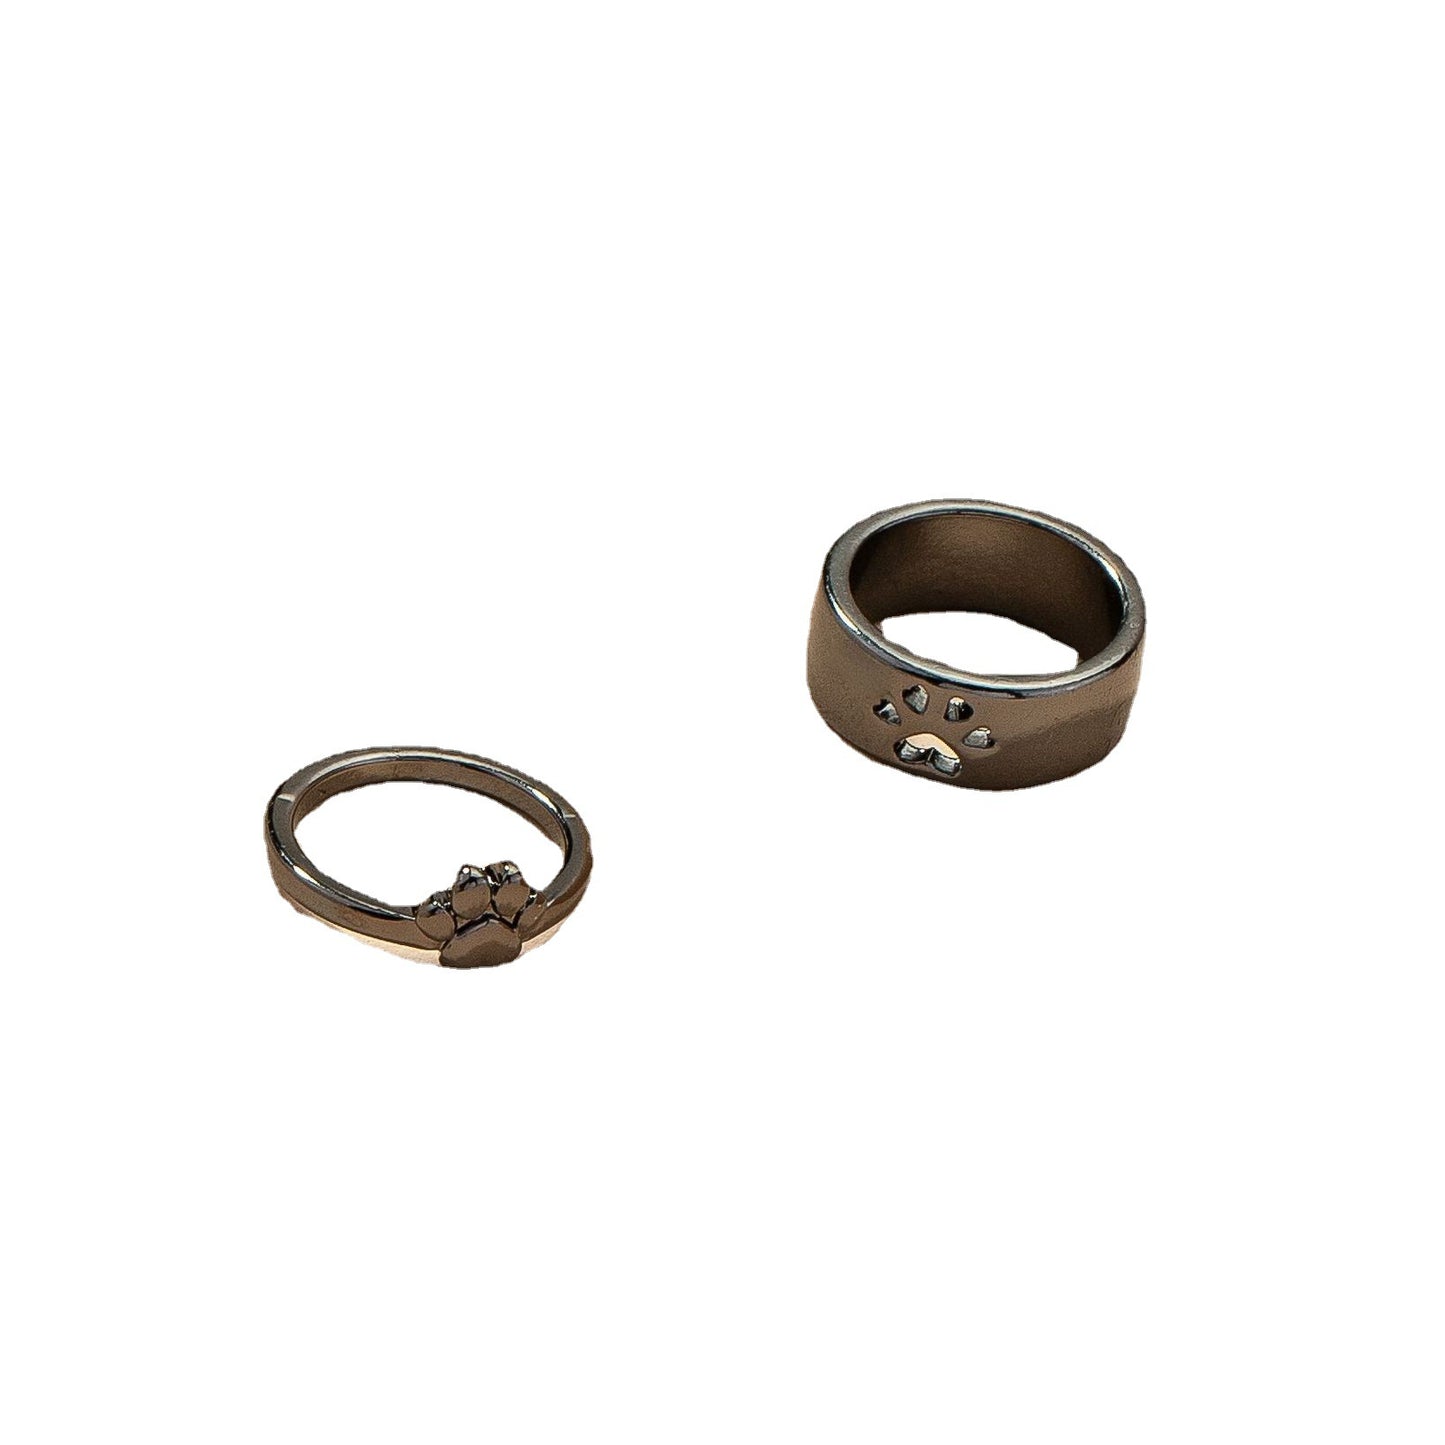 Vienna Verve Couple Rings: Stylish European Handcrafted Jewelry Set